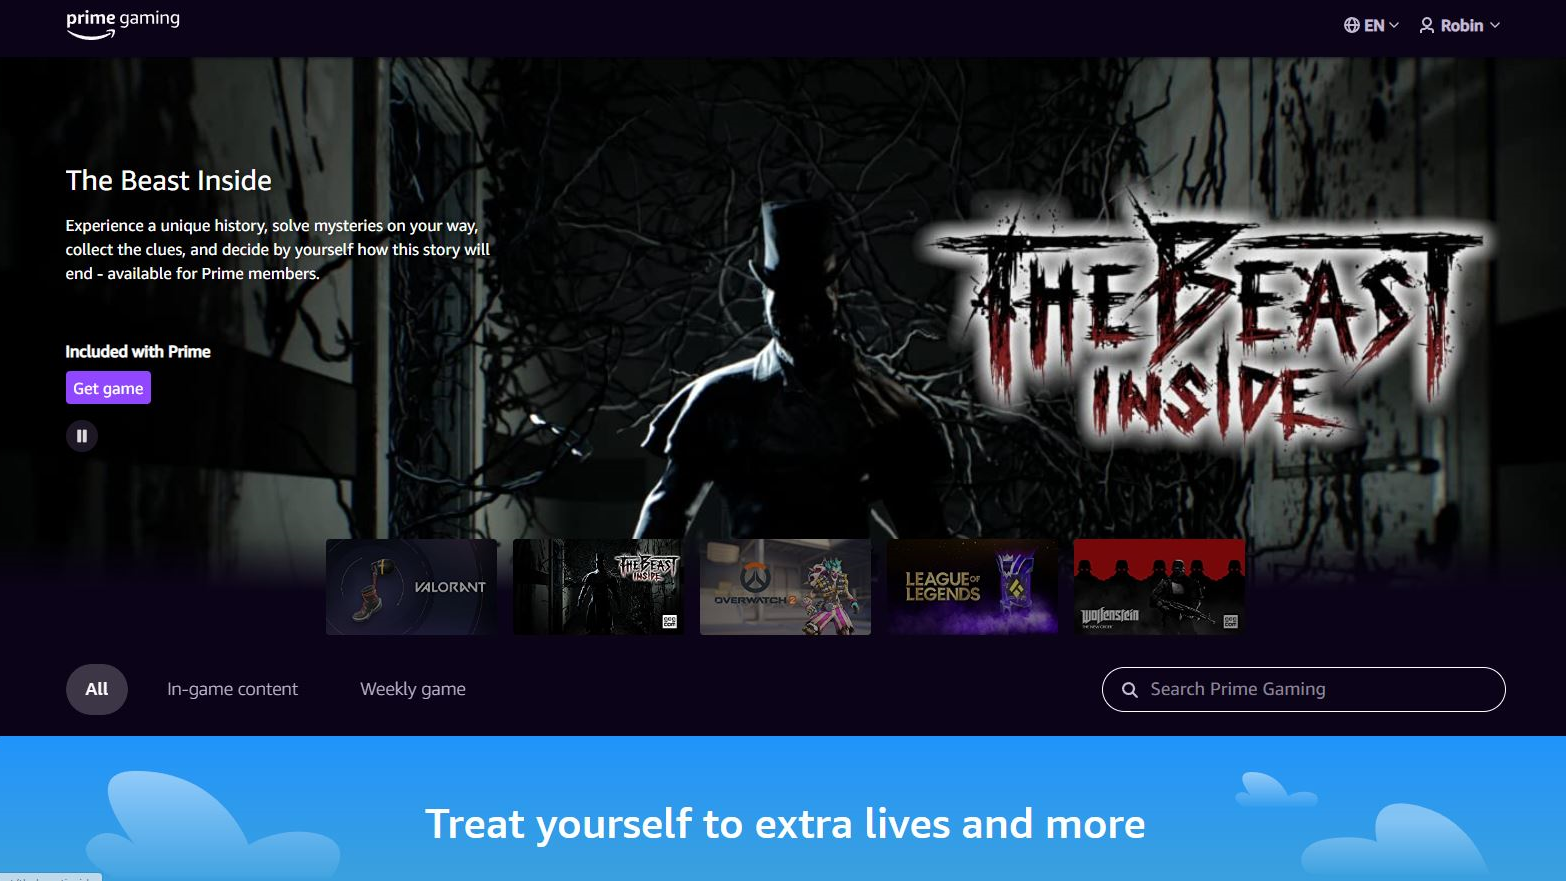 Part of the home screen of Amazon Prime Gaming, showing a game called The Beast Inside.